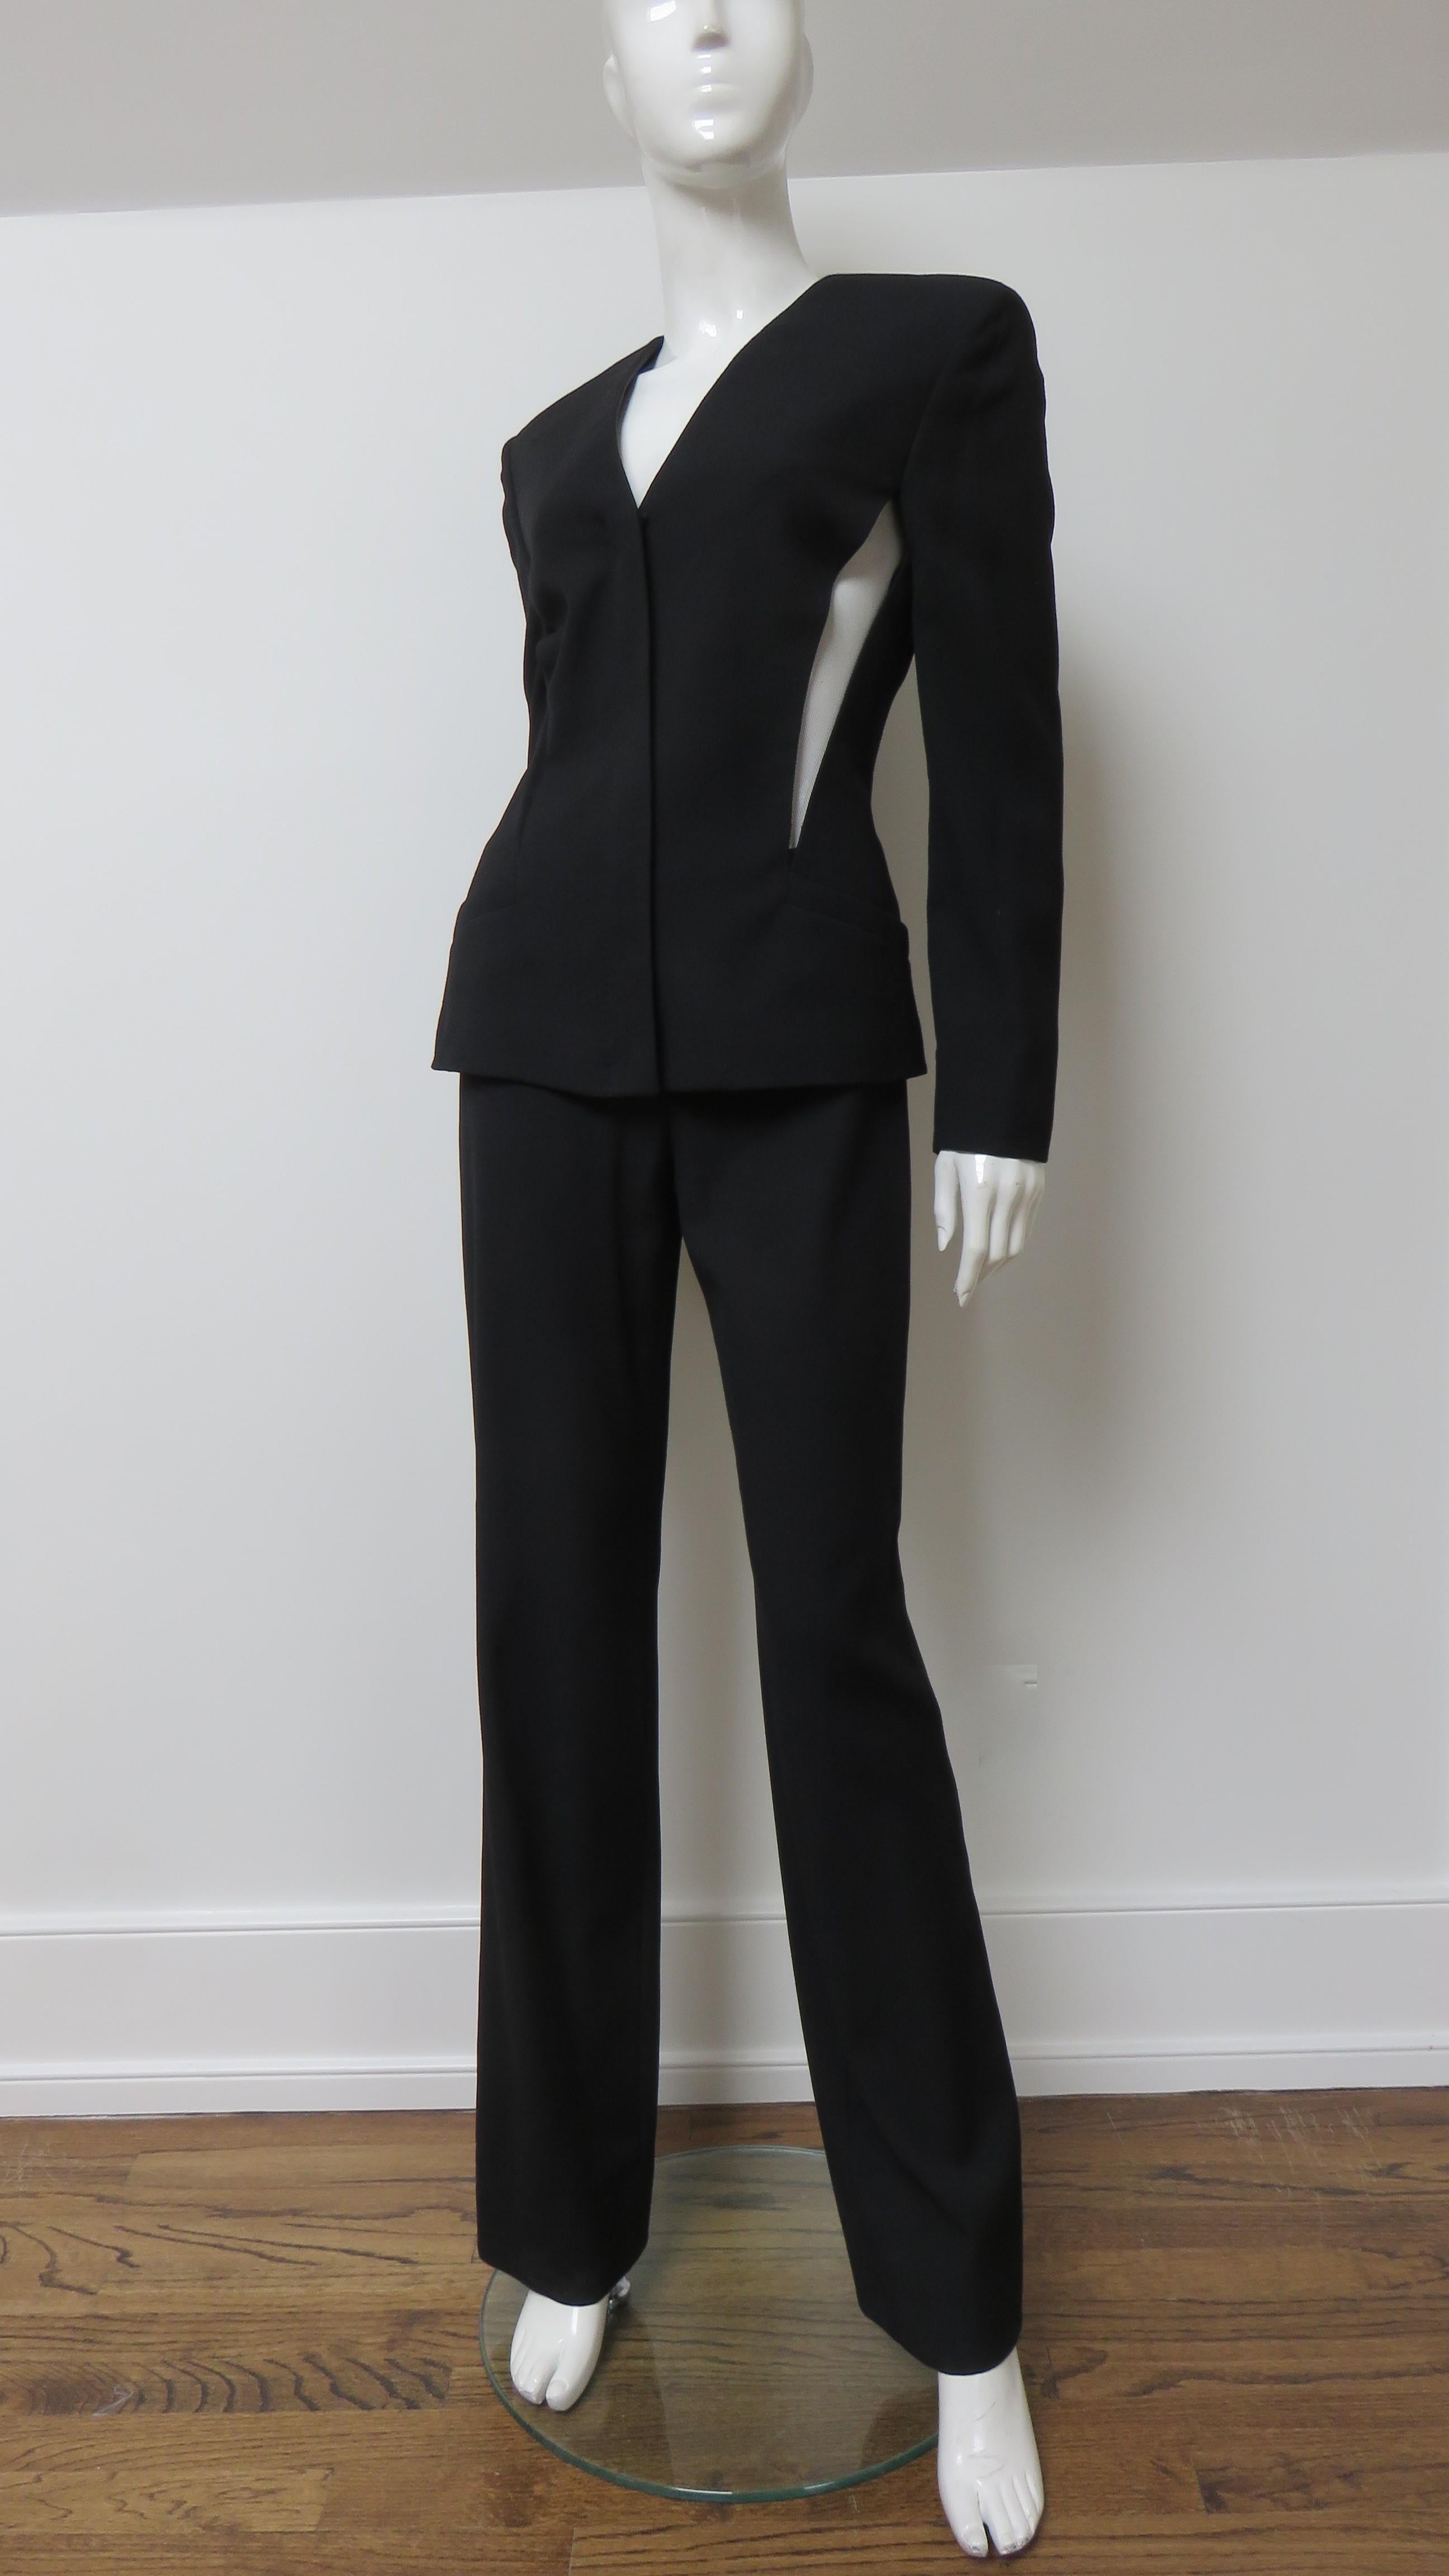 Black Gianni Versace Couture Silk Pant Suit with Cut outs 1990s For Sale